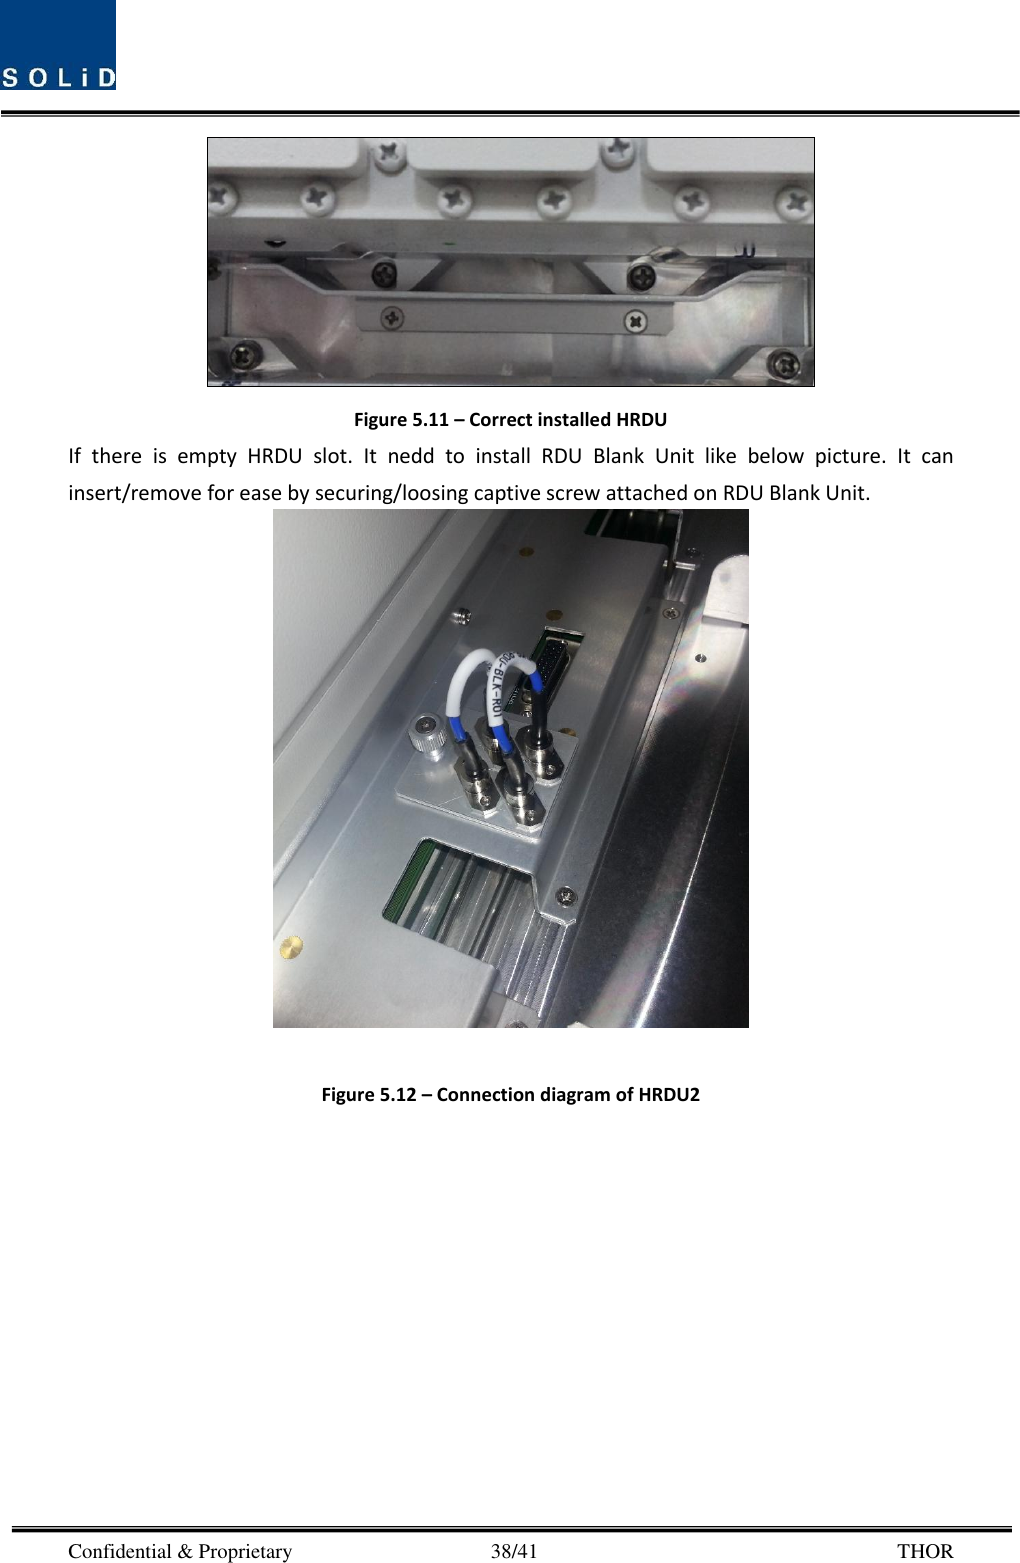  Confidential &amp; Proprietary                                      38/41       THOR  Figure 5.11 – Correct installed HRDU If  there  is  empty  HRDU  slot.  It  nedd  to  install  RDU  Blank  Unit  like  below  picture.  It  can insert/remove for ease by securing/loosing captive screw attached on RDU Blank Unit.     Figure 5.12 – Connection diagram of HRDU2     